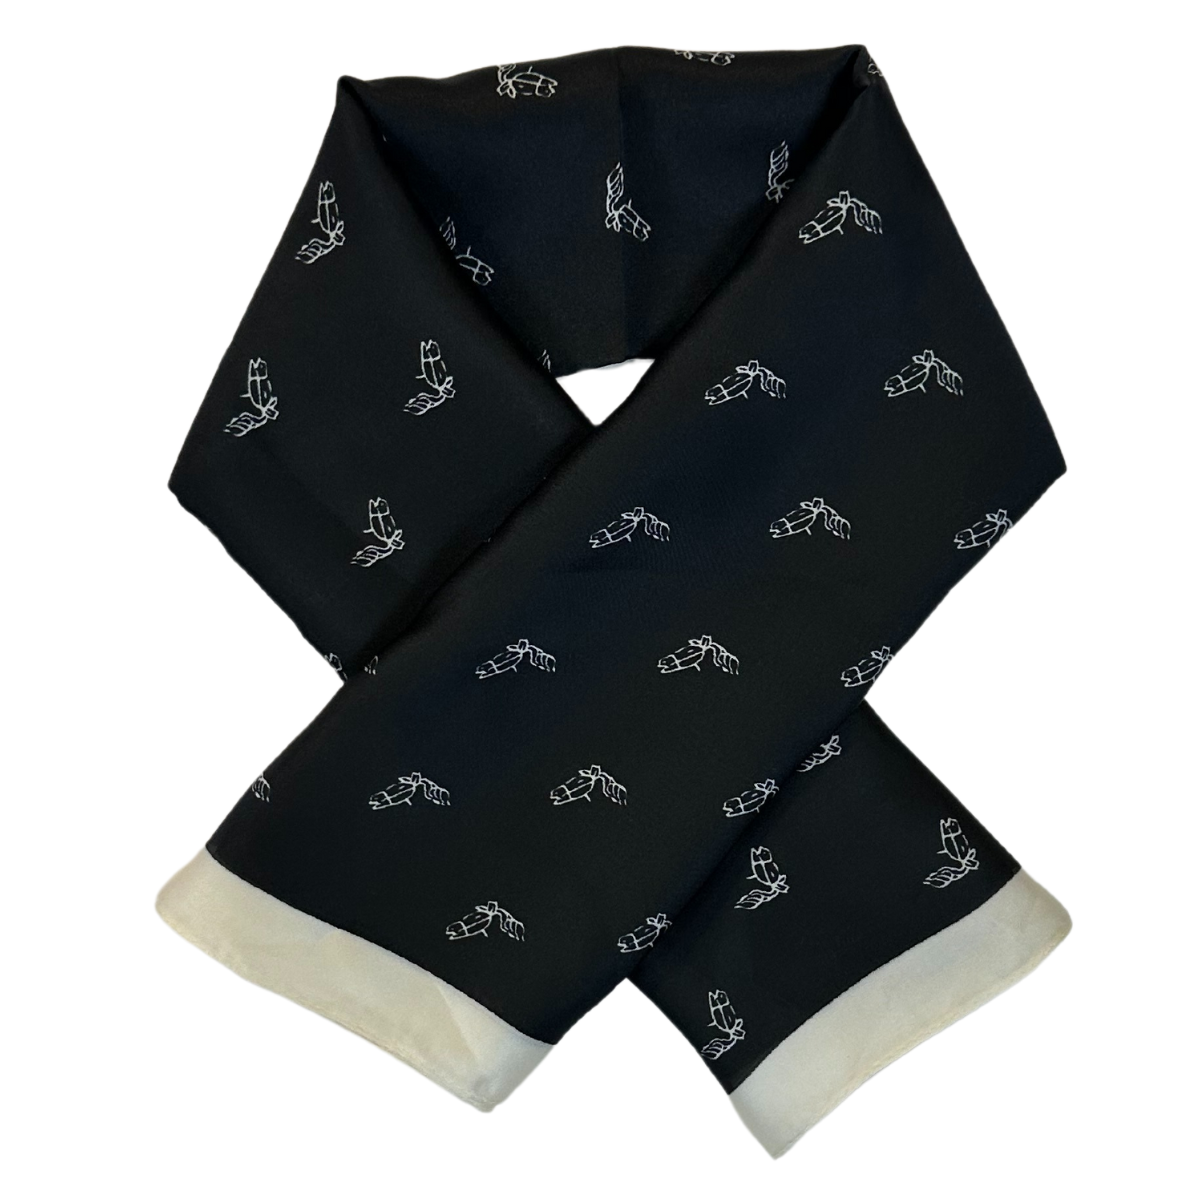 Vintage Horse Square Scarf in Black/Horse Silhouettes